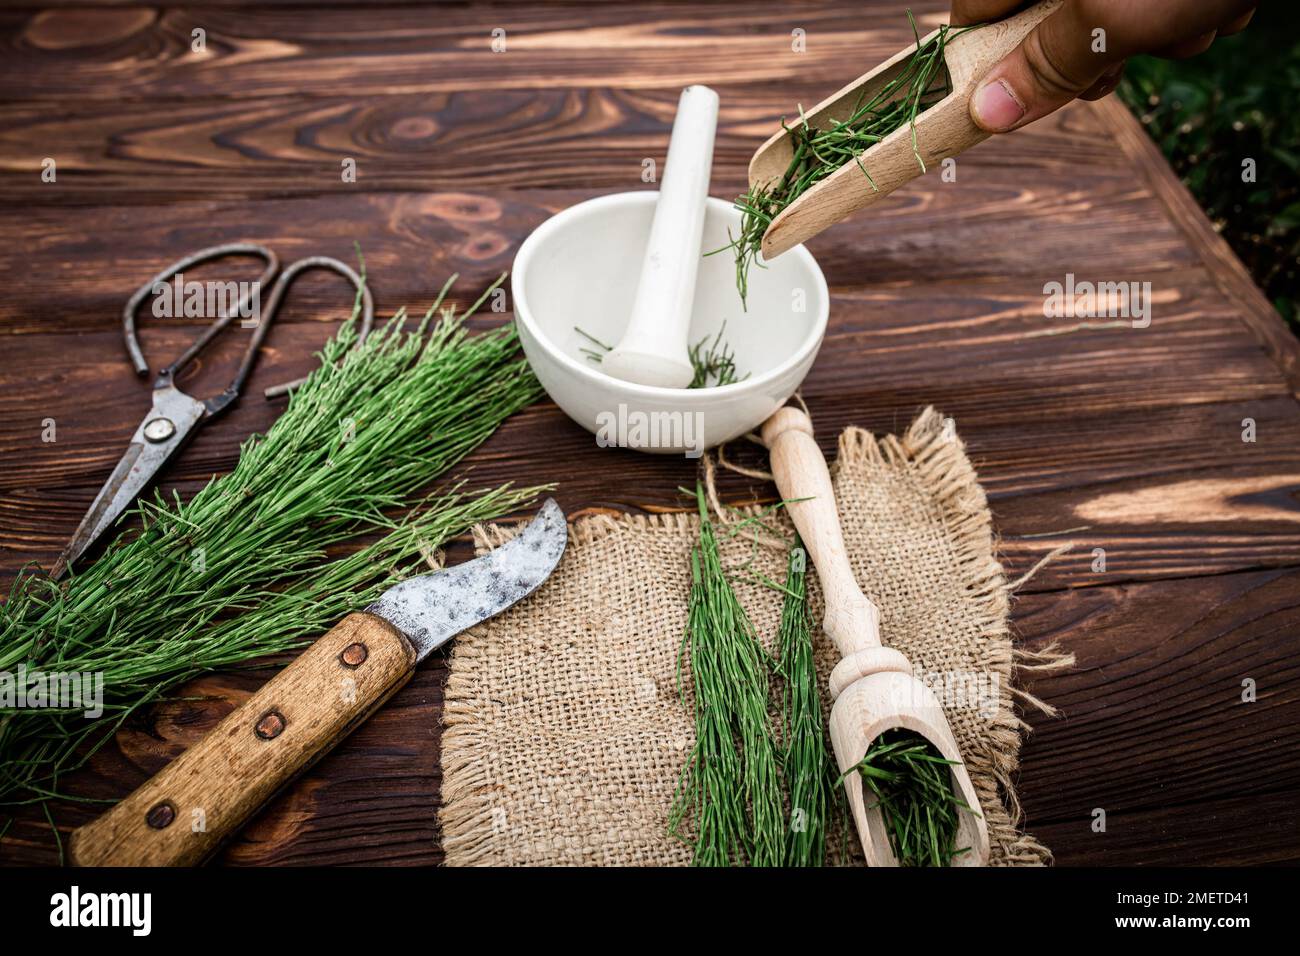 hand pouring dried horsetail stems into an apothecary mortar to prepare medicine. Alternative medicine. Herbalism Stock Photo